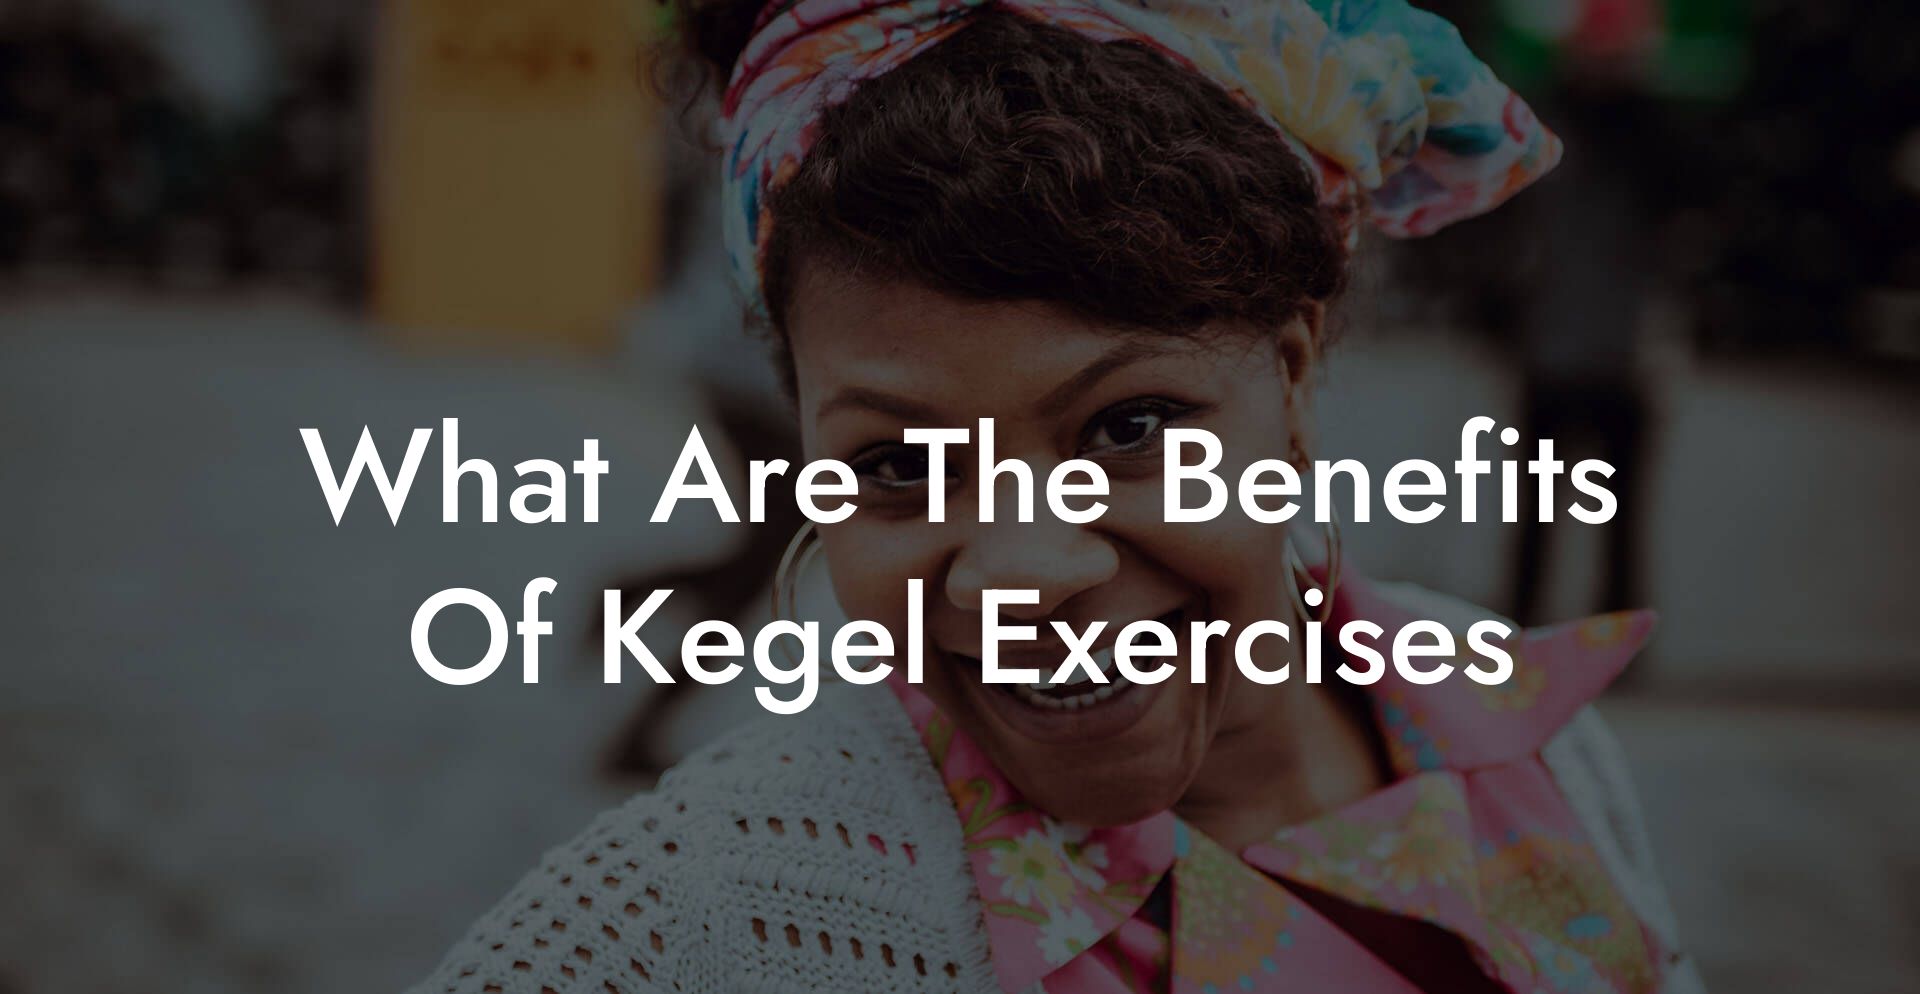 What Are The Benefits Of Kegel Exercises